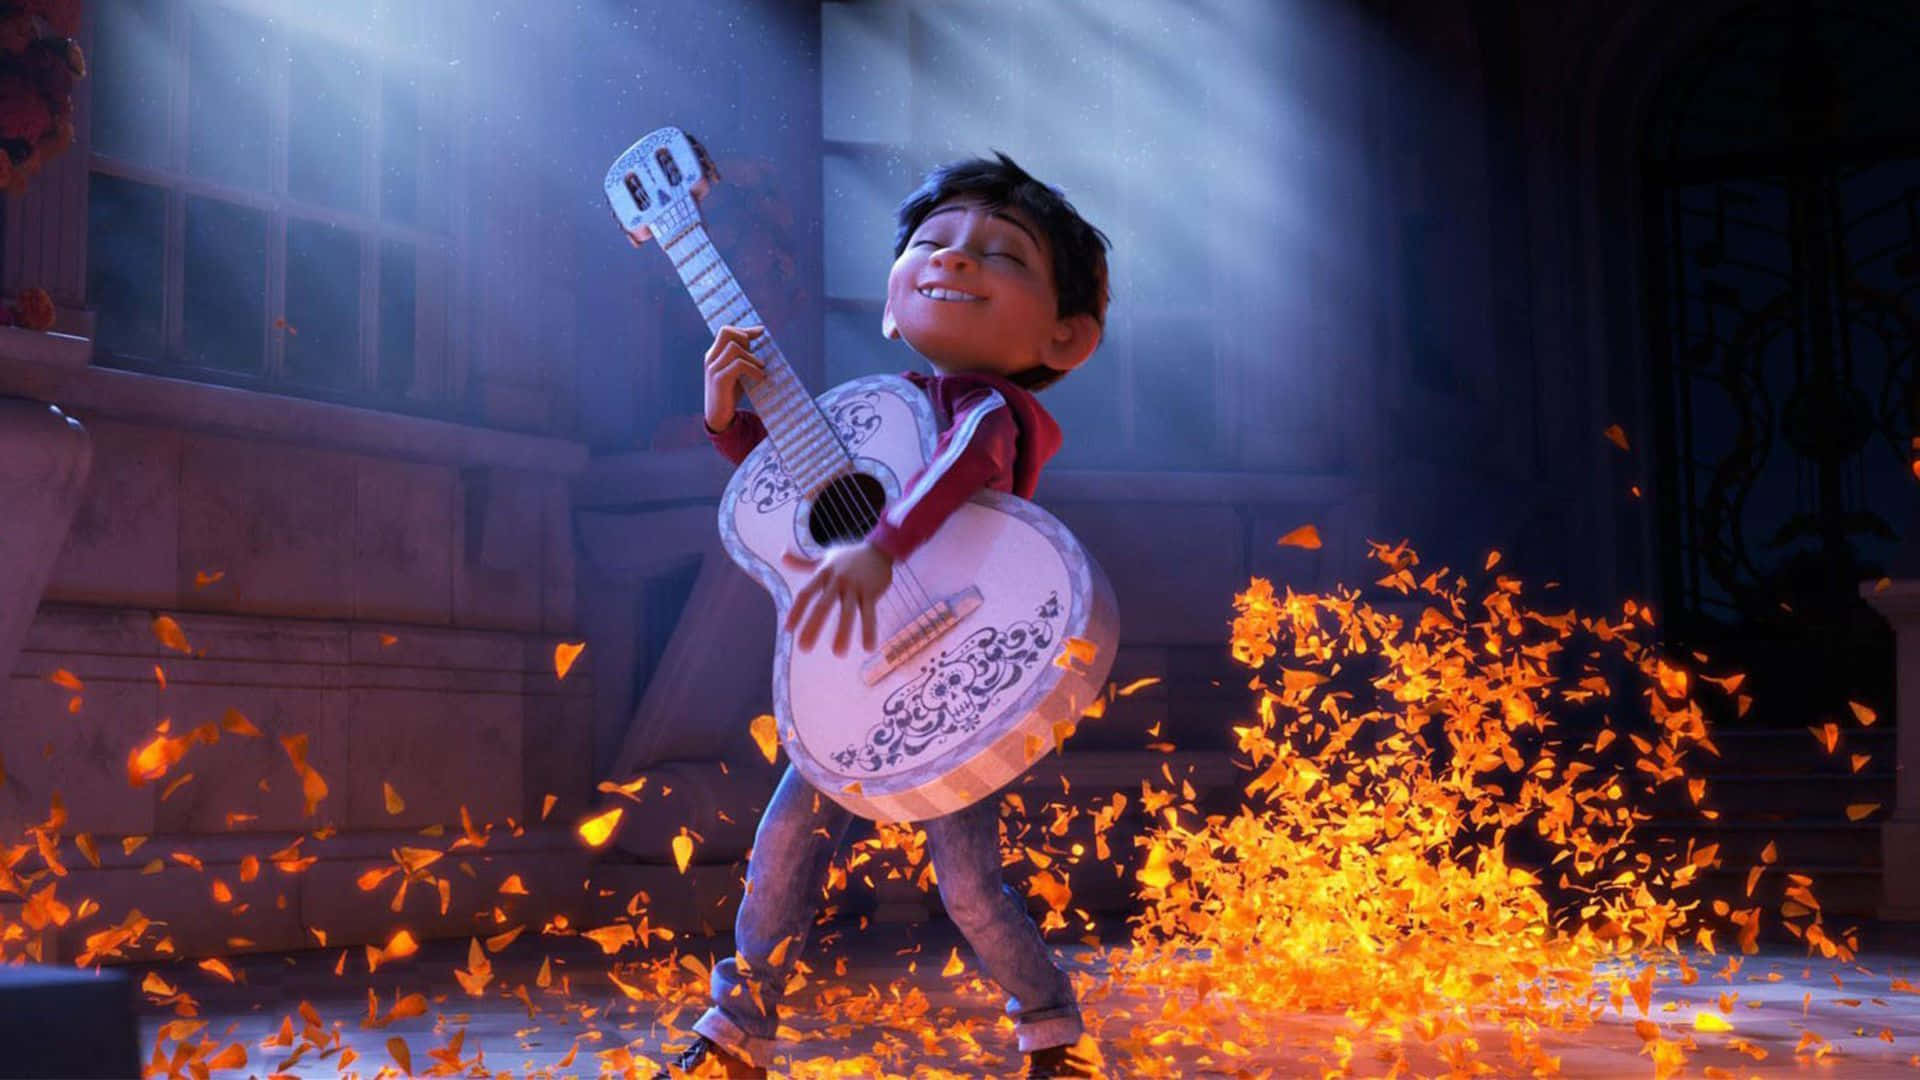 Family and Tradition at the Heart of Pixar's Coco Wallpaper